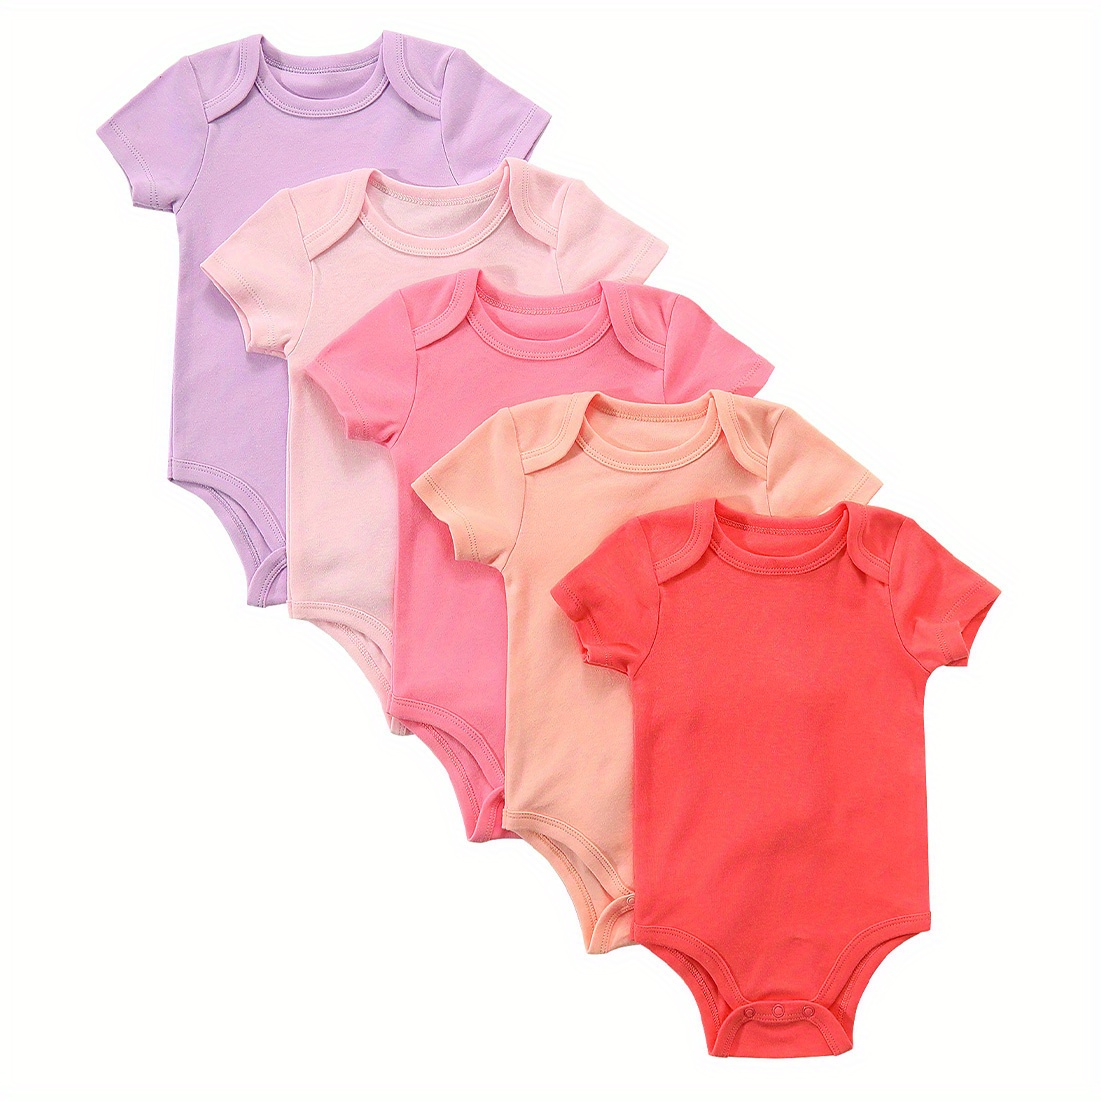 

5-pack Baby Girls Onesies, Short Sleeve Bodysuits, 100% Cotton Candy Color Rompers For Newborn And Infants